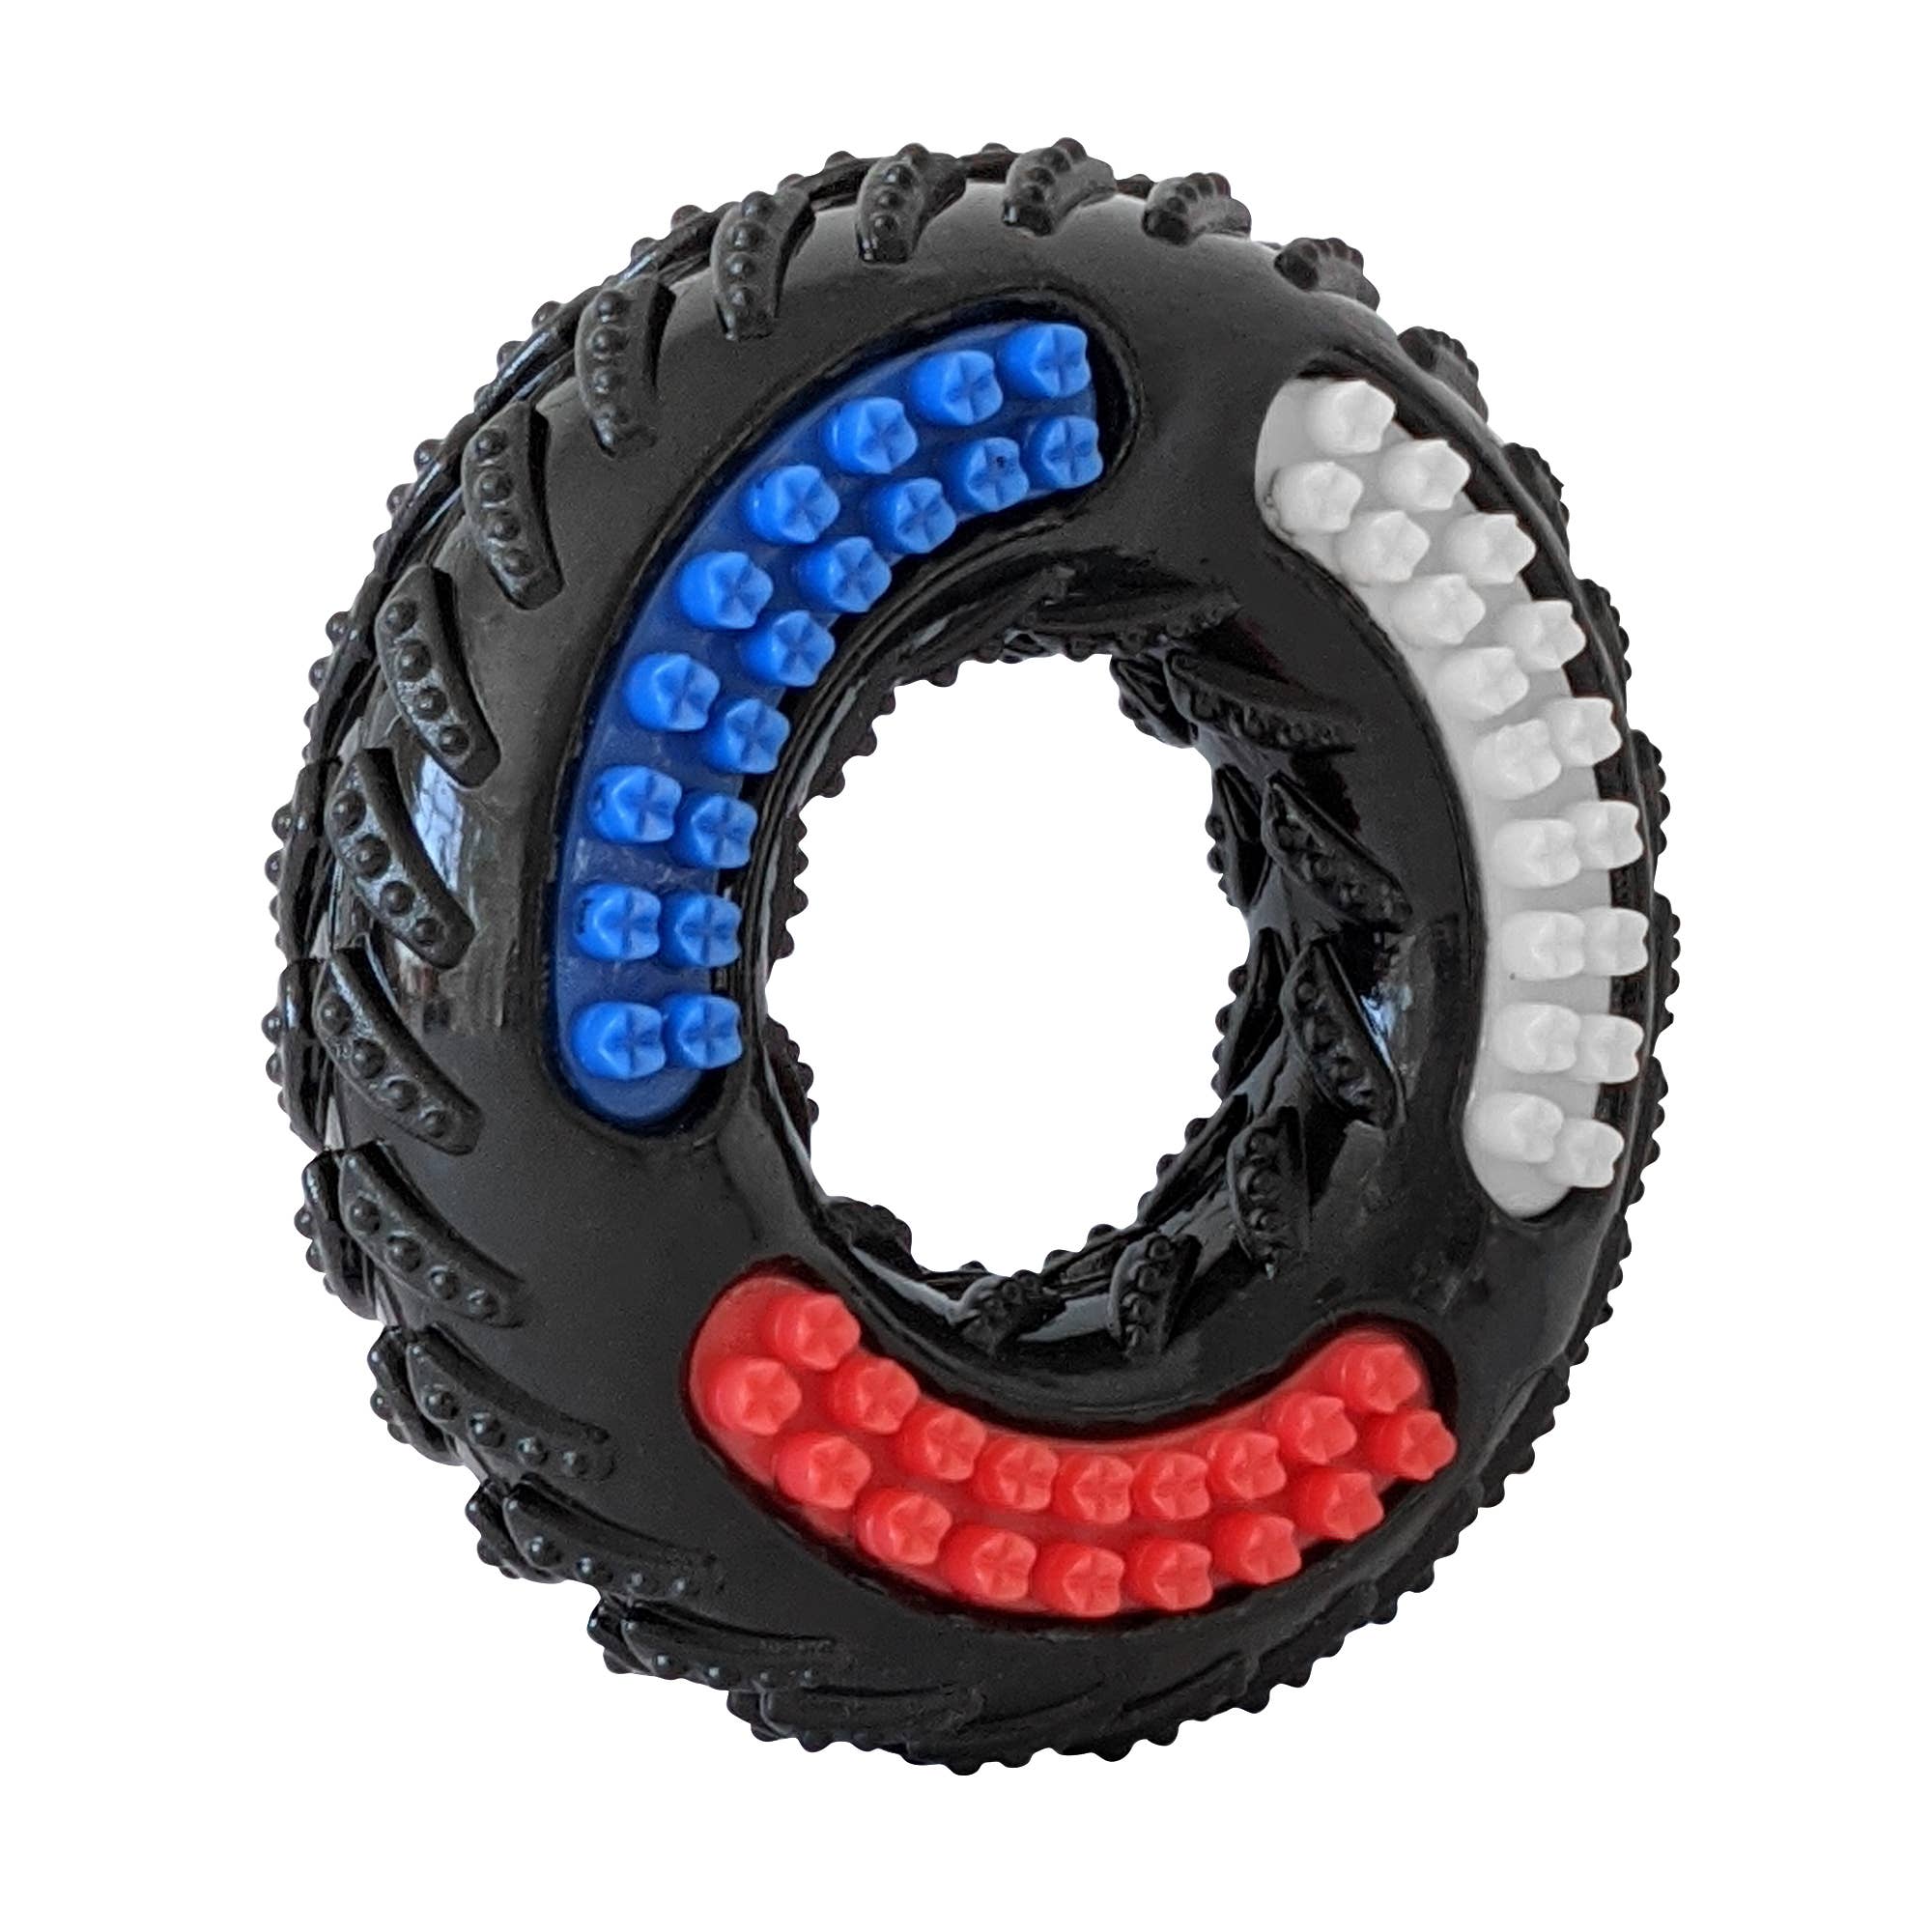 TPR Textured Dog Chew Toy - "Tire of Fun"